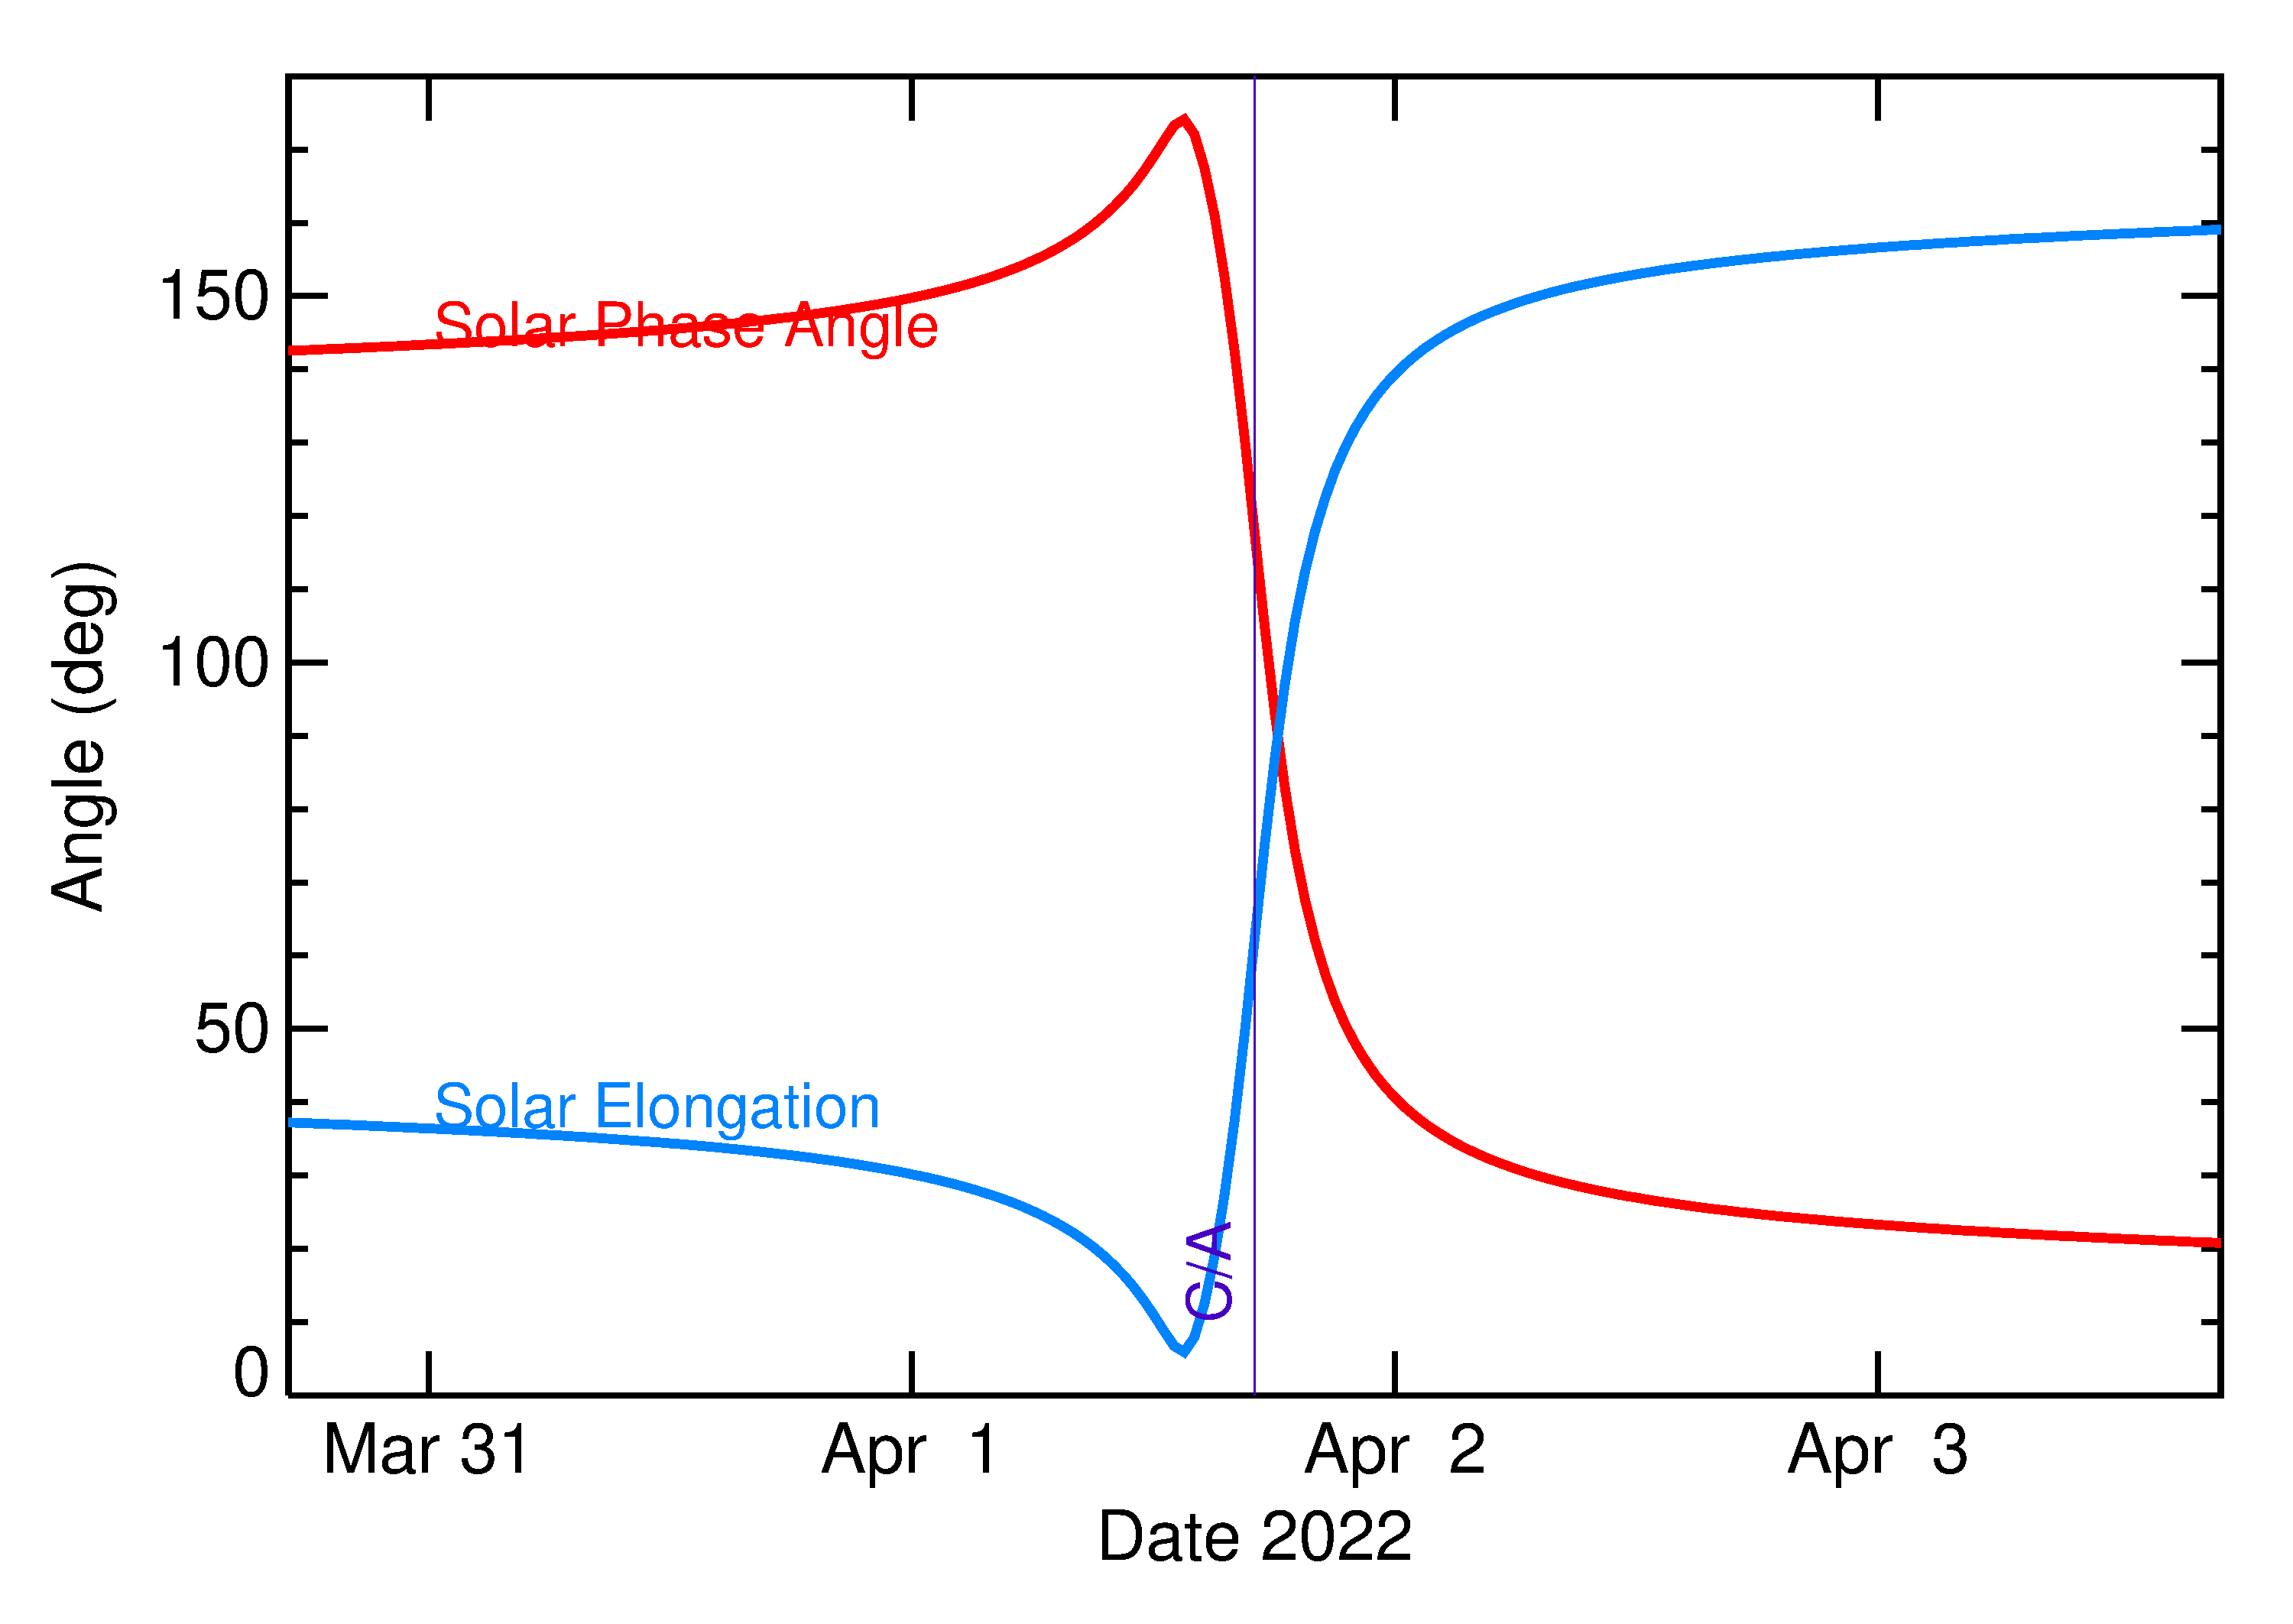 Solar Elongation and Solar Phase Angle of 2022 GQ in the days around closest approach